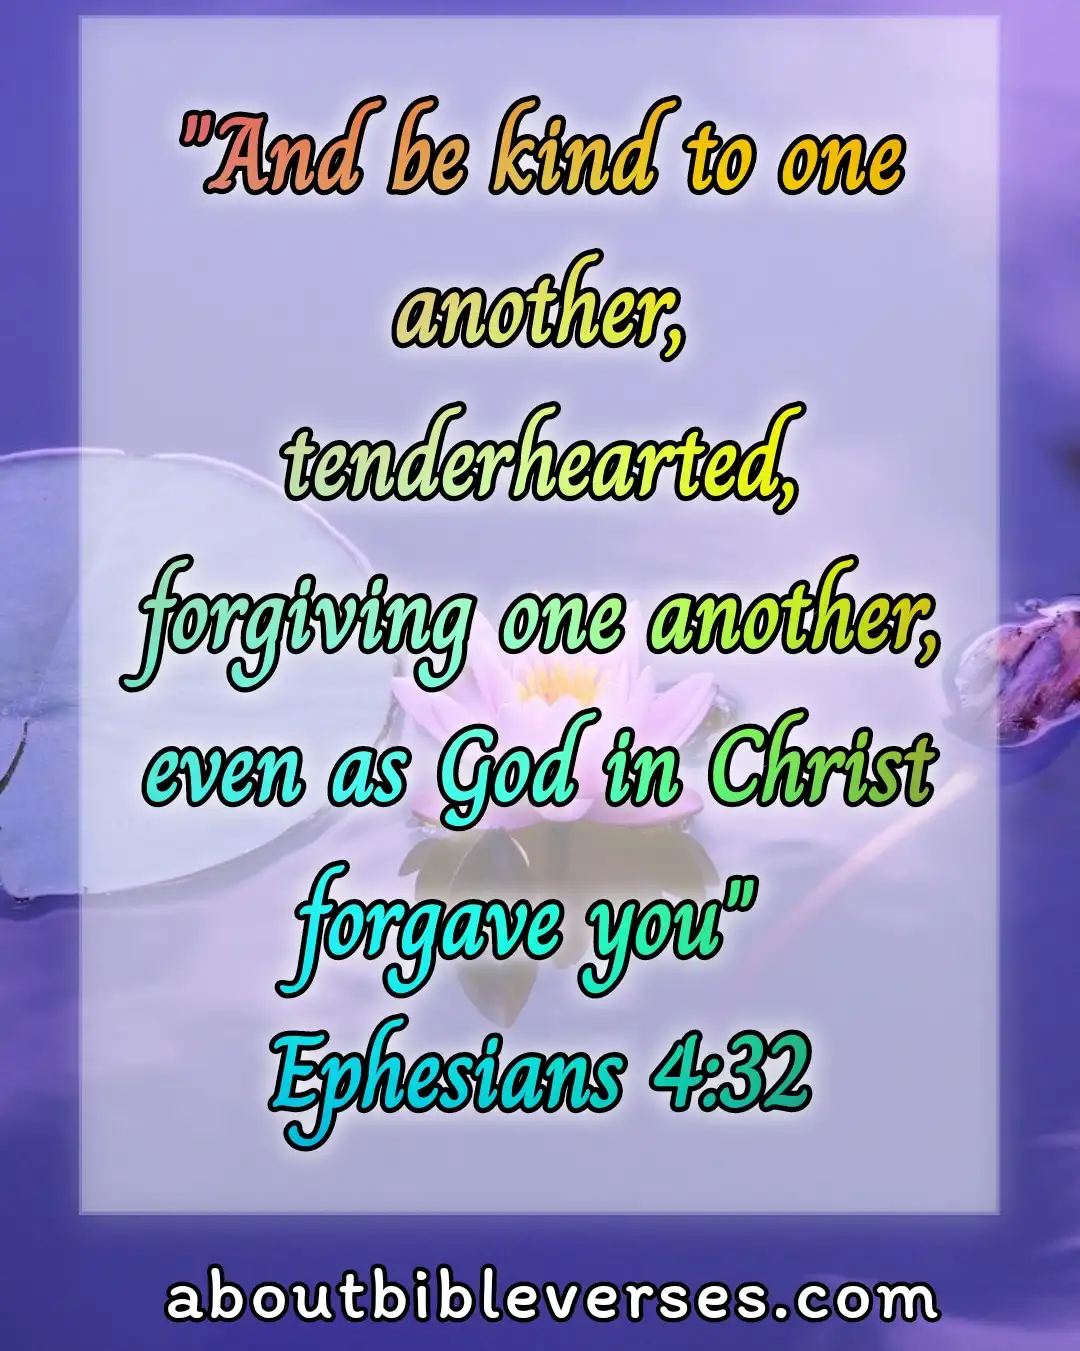 Bible Verses About Affection (Ephesians 4:32)